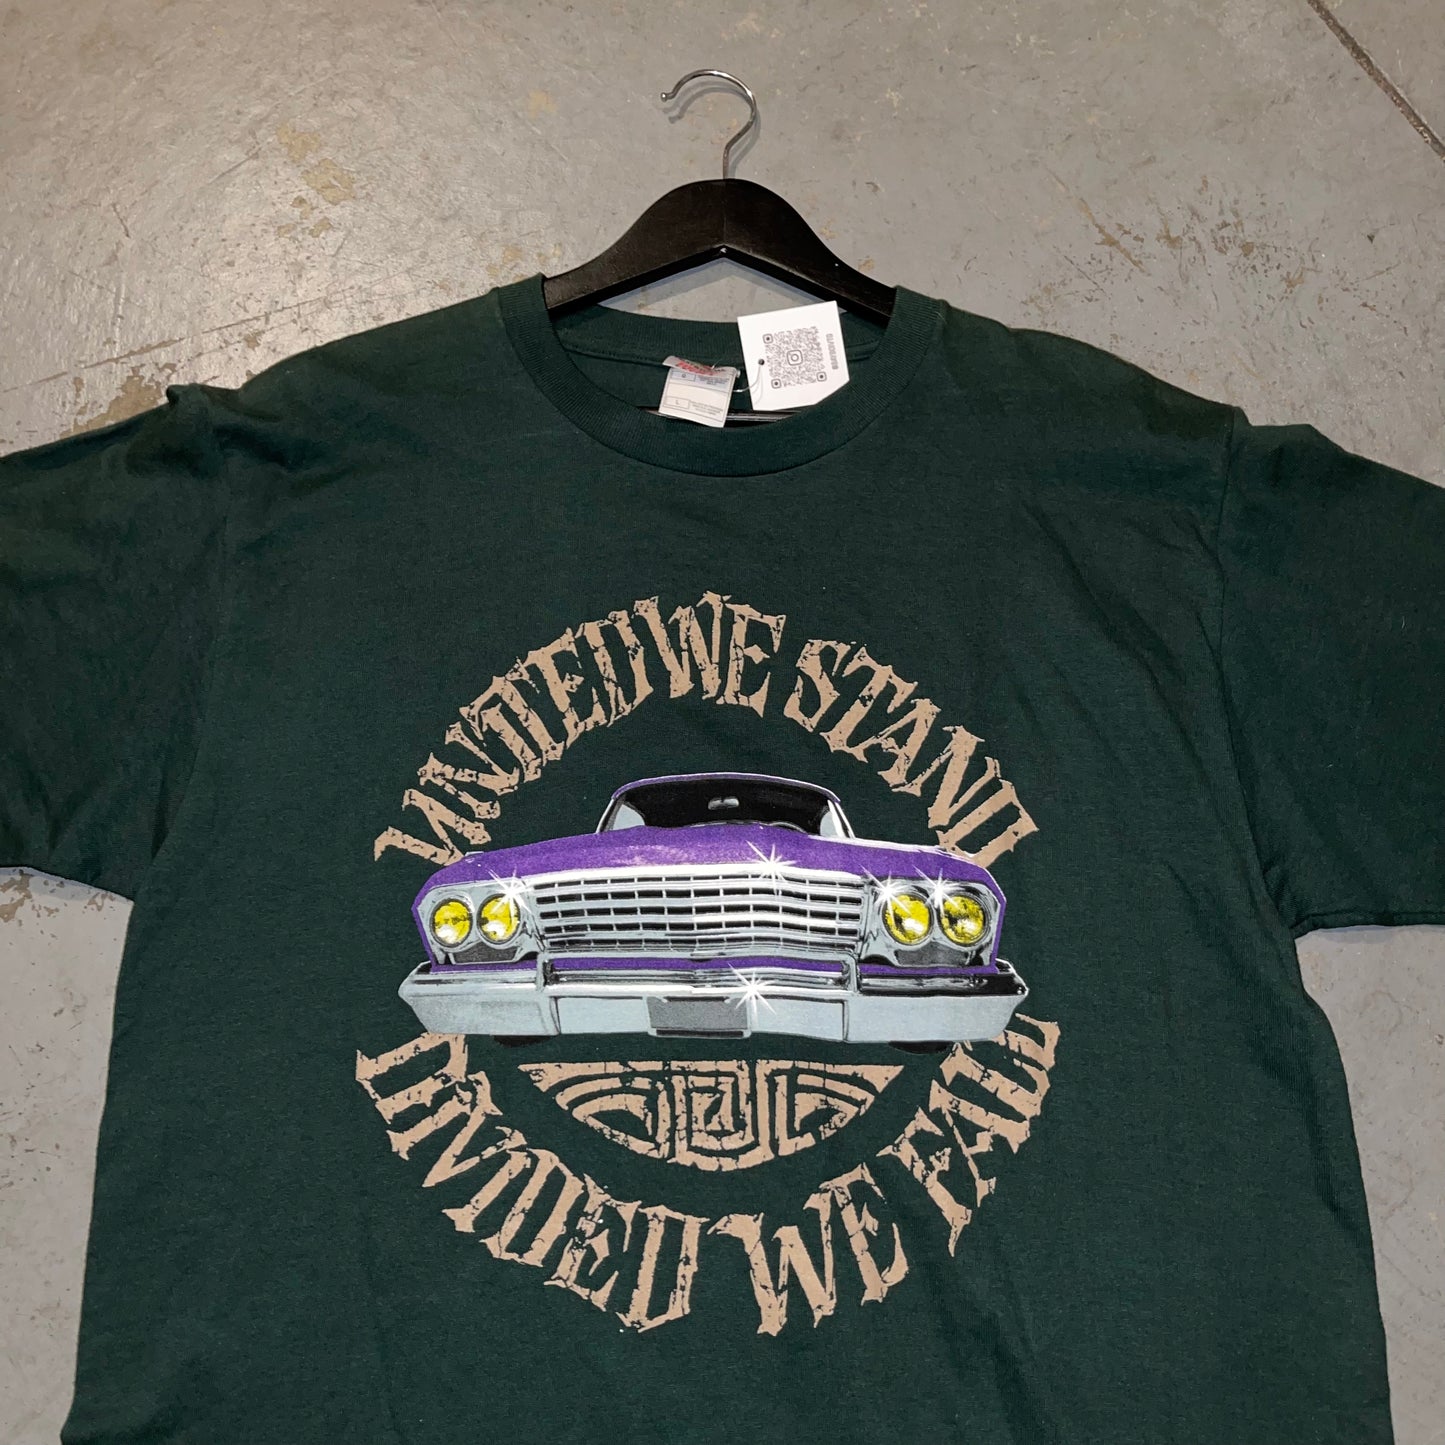 Vintage ‘97 El Rey Del Barrio “United We Stand Divided We Fall” Lowrider Style T. Large